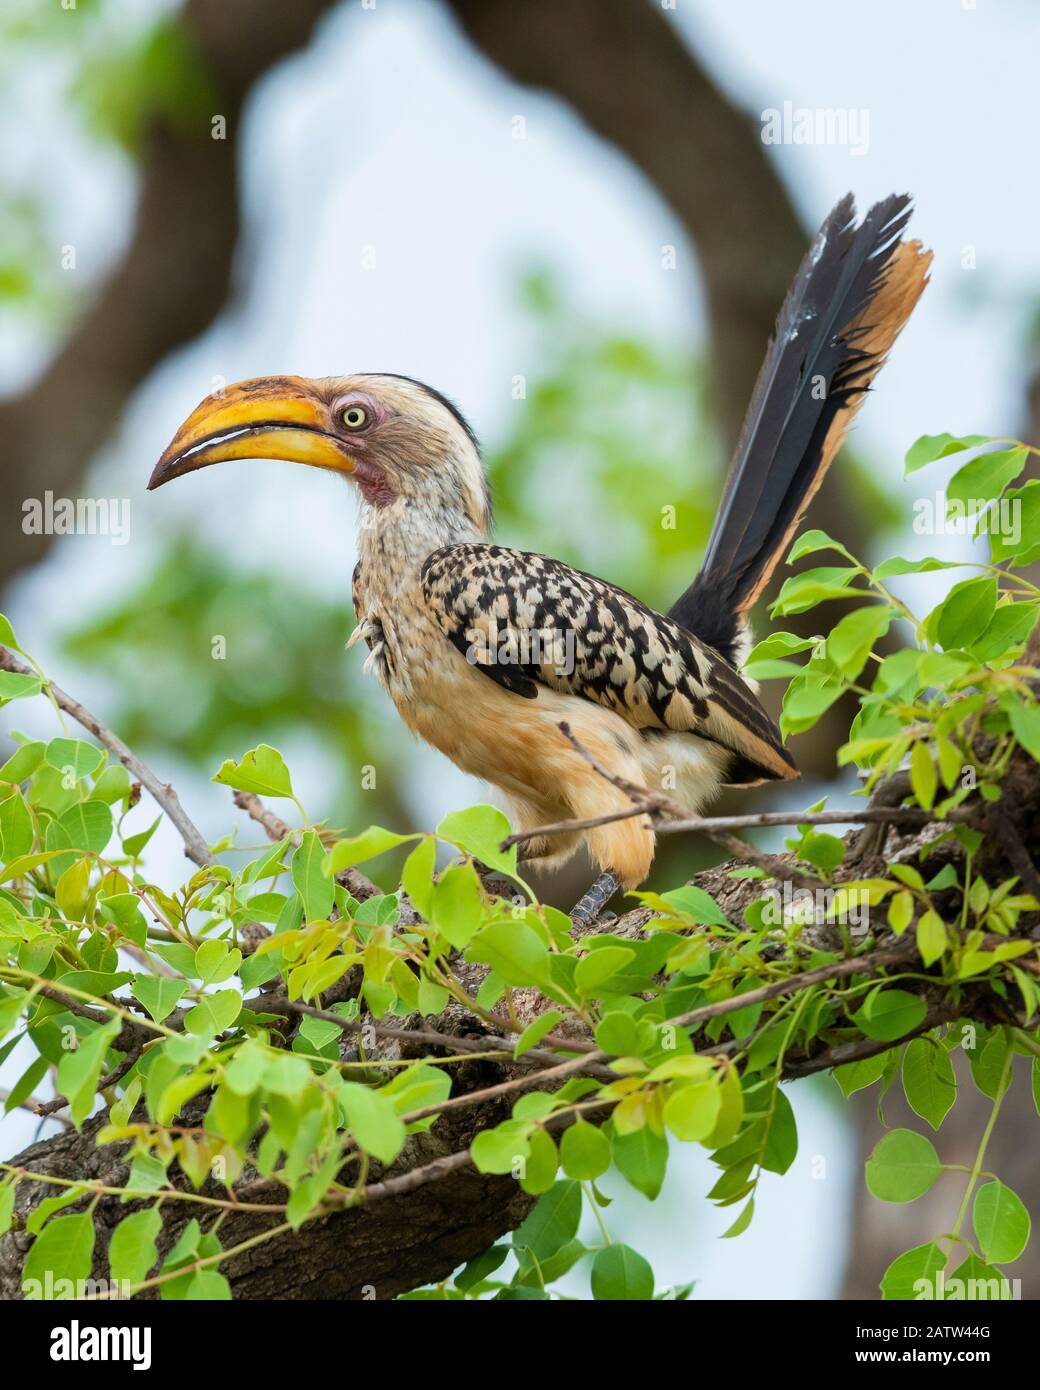 Southern Yellow-billed Hornbill (Lamprotornis leucomelas), side view of an adult perched on a branch, Mpumalanga, South Africa Stock Photo